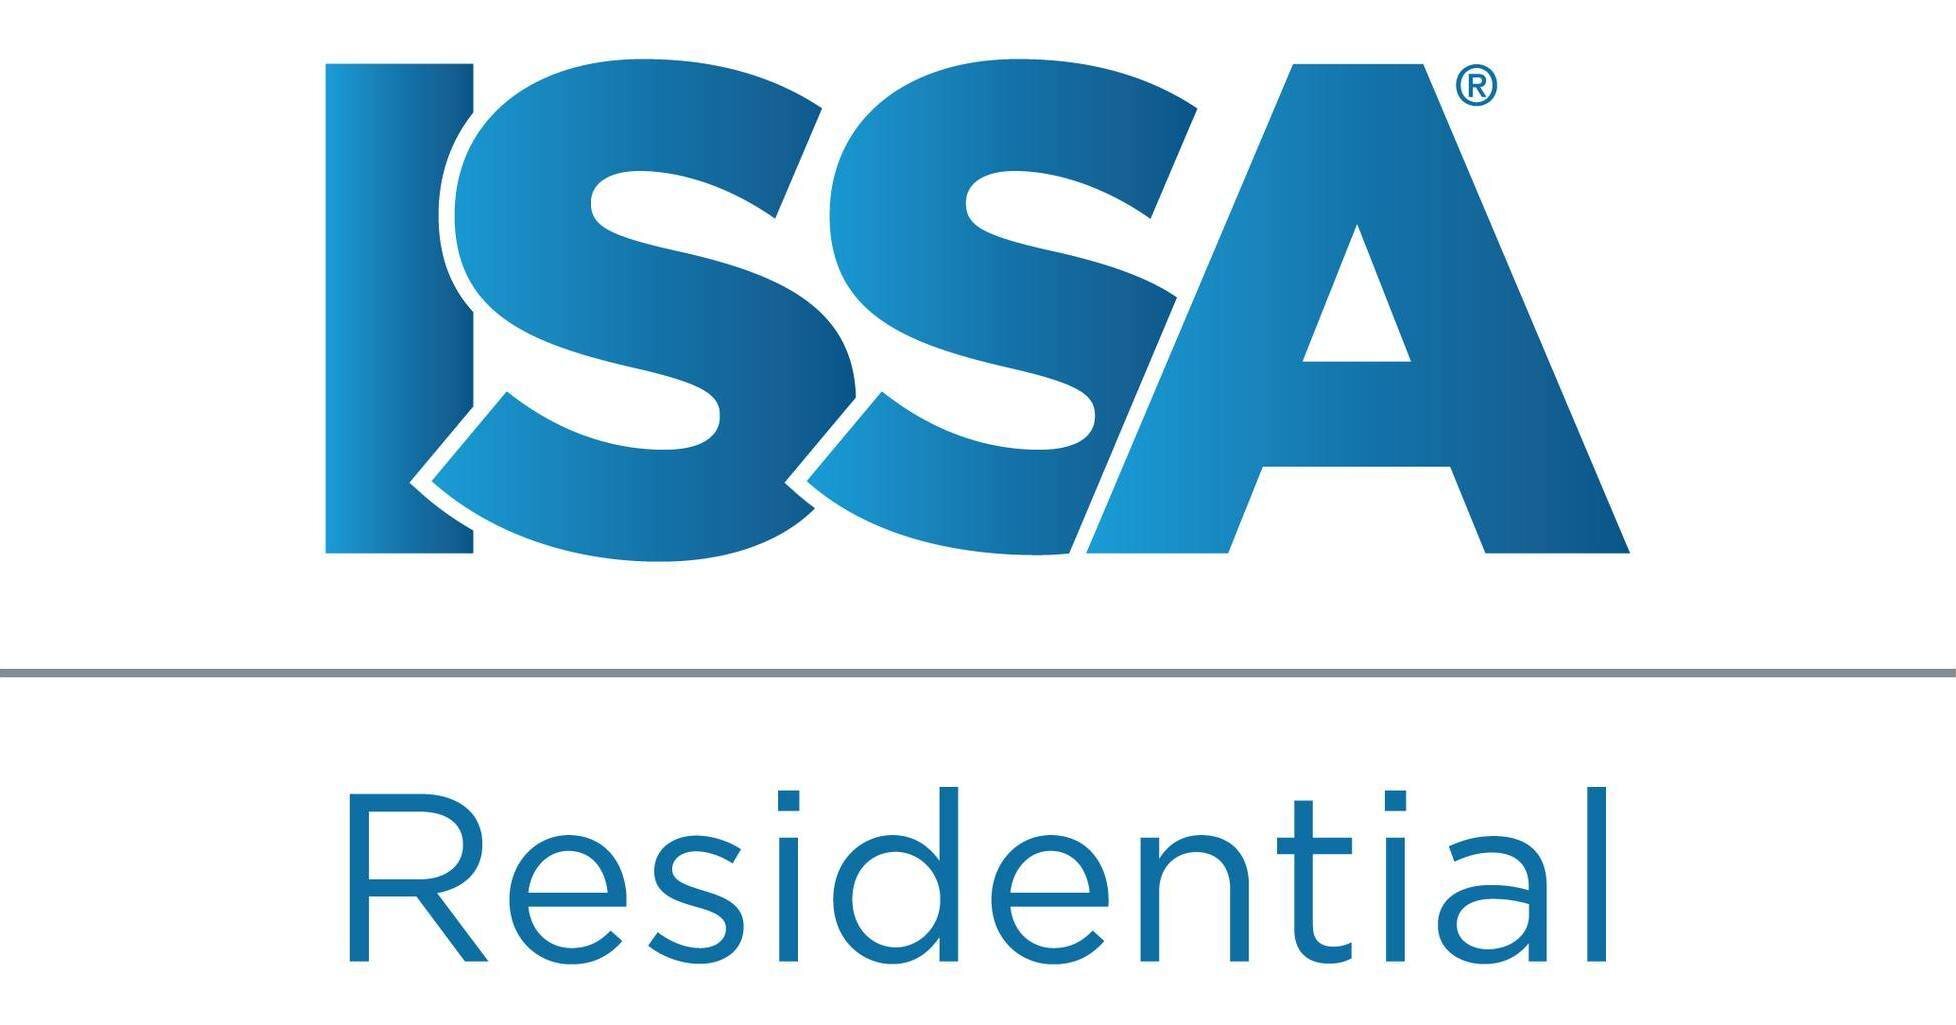 ISSA Residential is dedicated to improving the standard of professionalism in the residential cleaning industry. 2023 marked their 100th year in service. Formerly the Association of Residential Cleaning Services International (ARCSI), the rebranding 